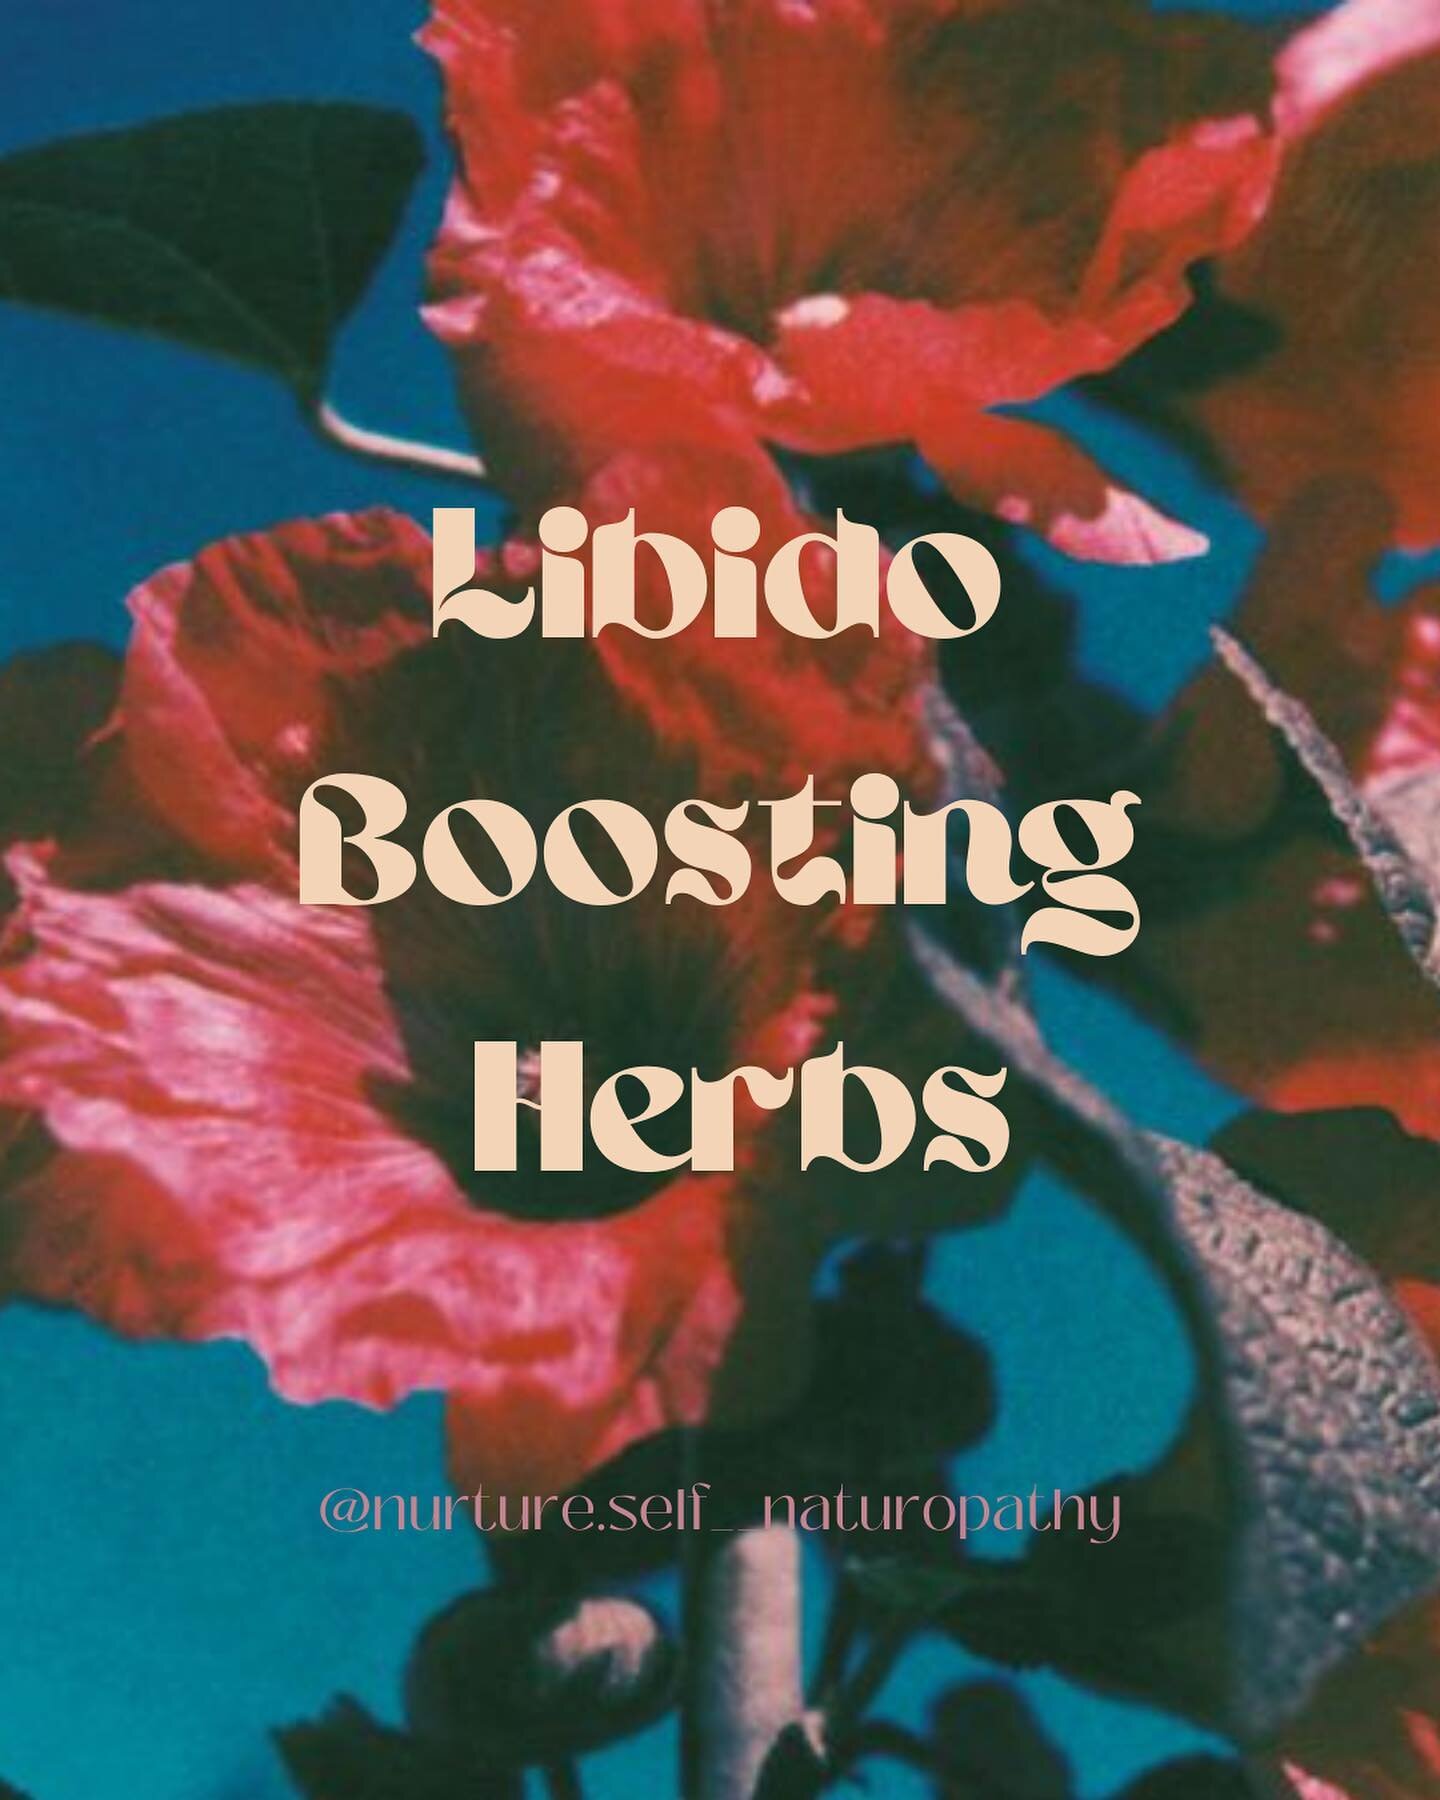 Further to a previous post about stress &amp; how it can affect your libido &ndash; here are some herbs that may be helpful if you&rsquo;re finding it hard to get in the mood ⚡️
What herb/s in what combination &amp; dosage will depend on your unique 